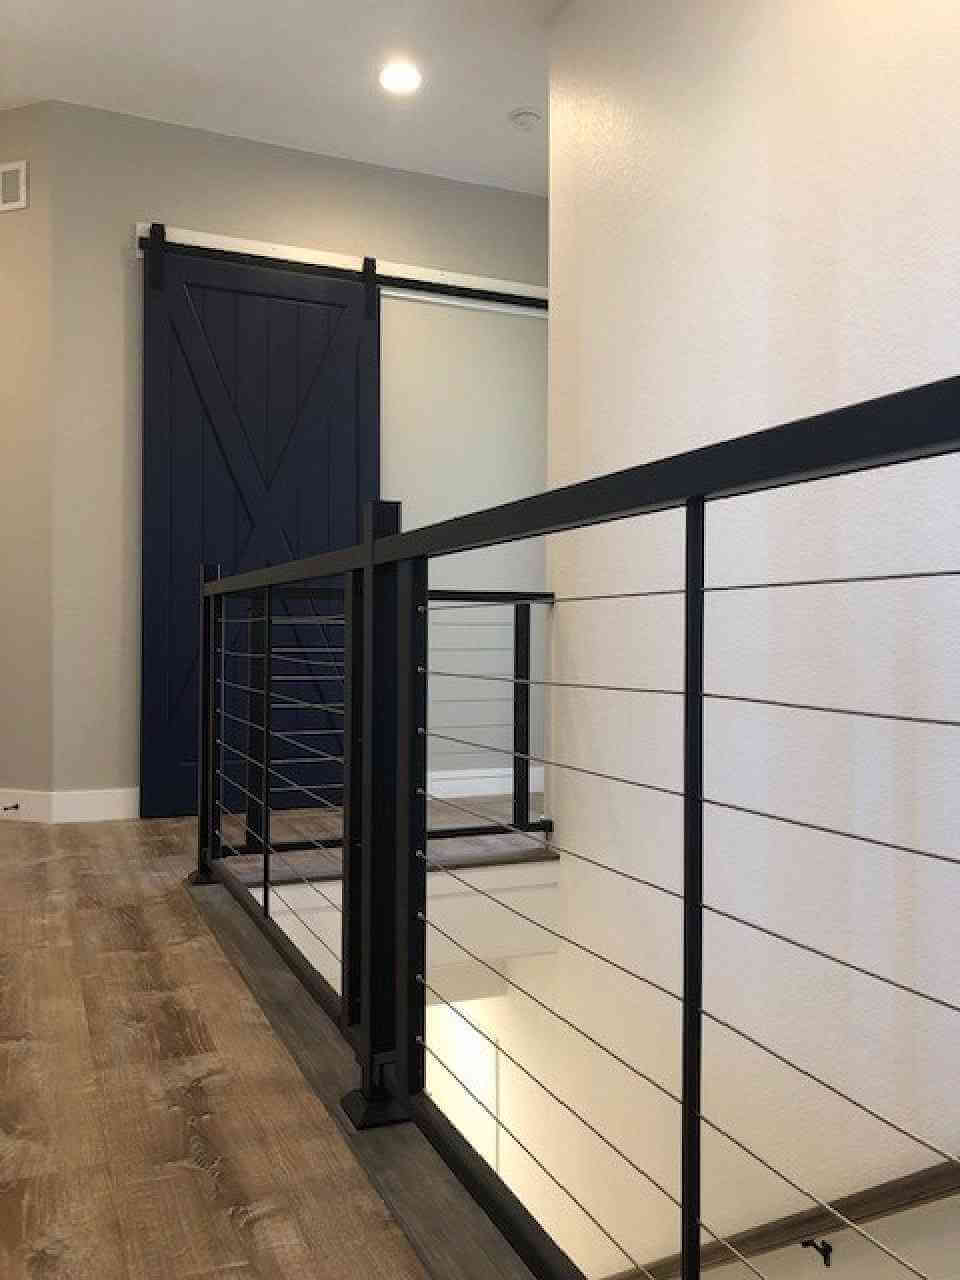 Stair Railing and Laundry Room Barn Door